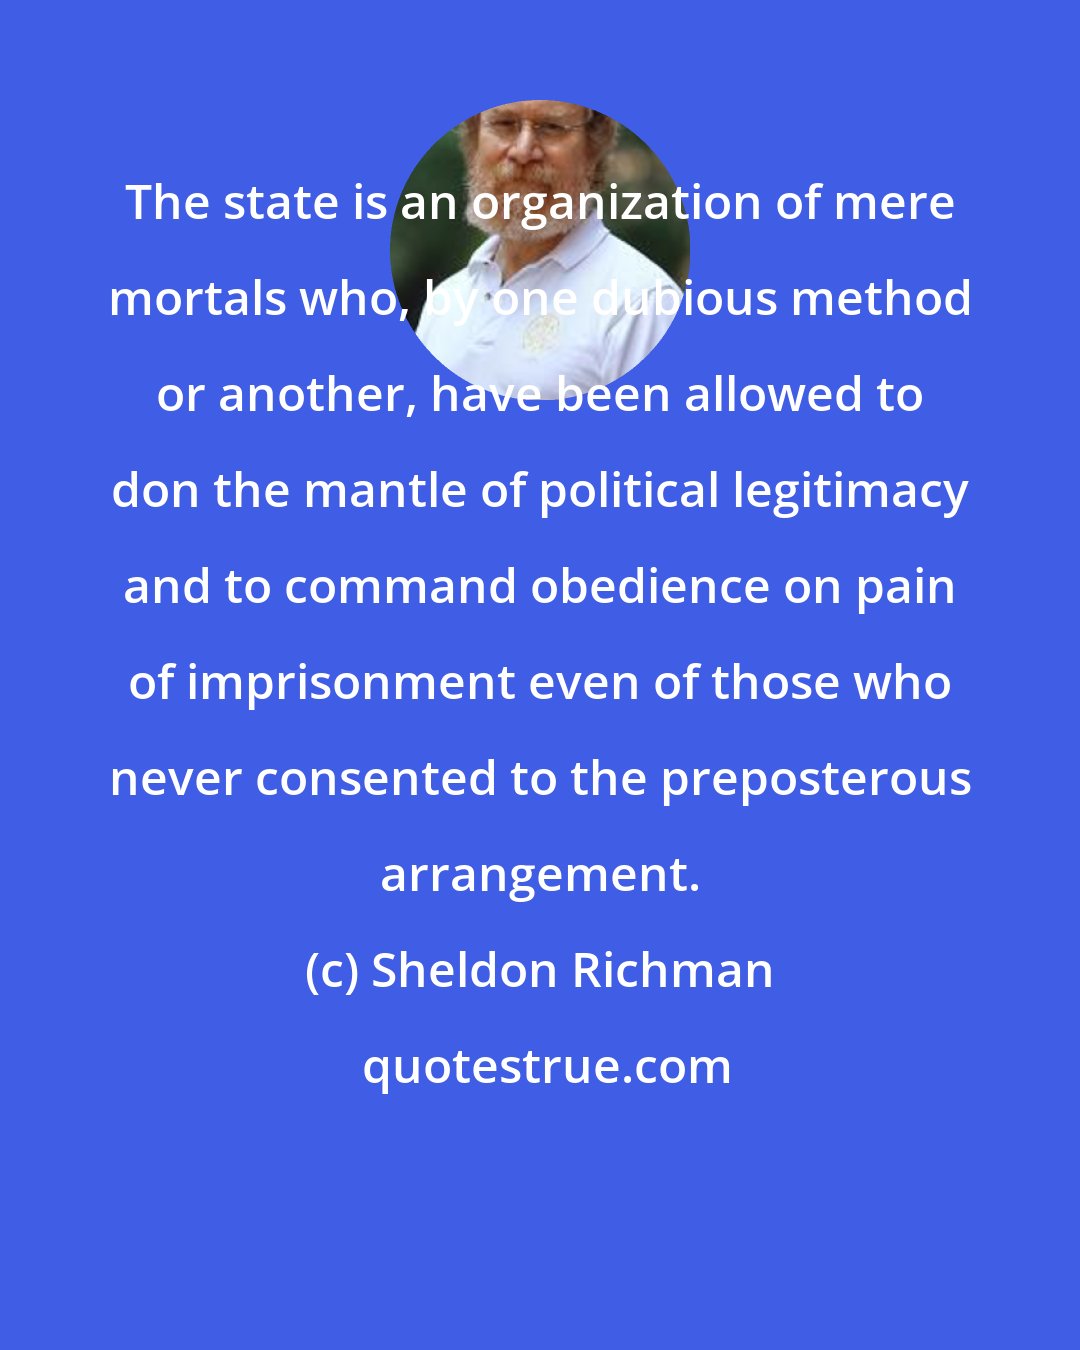 Sheldon Richman: The state is an organization of mere mortals who, by one dubious method or another, have been allowed to don the mantle of political legitimacy and to command obedience on pain of imprisonment even of those who never consented to the preposterous arrangement.